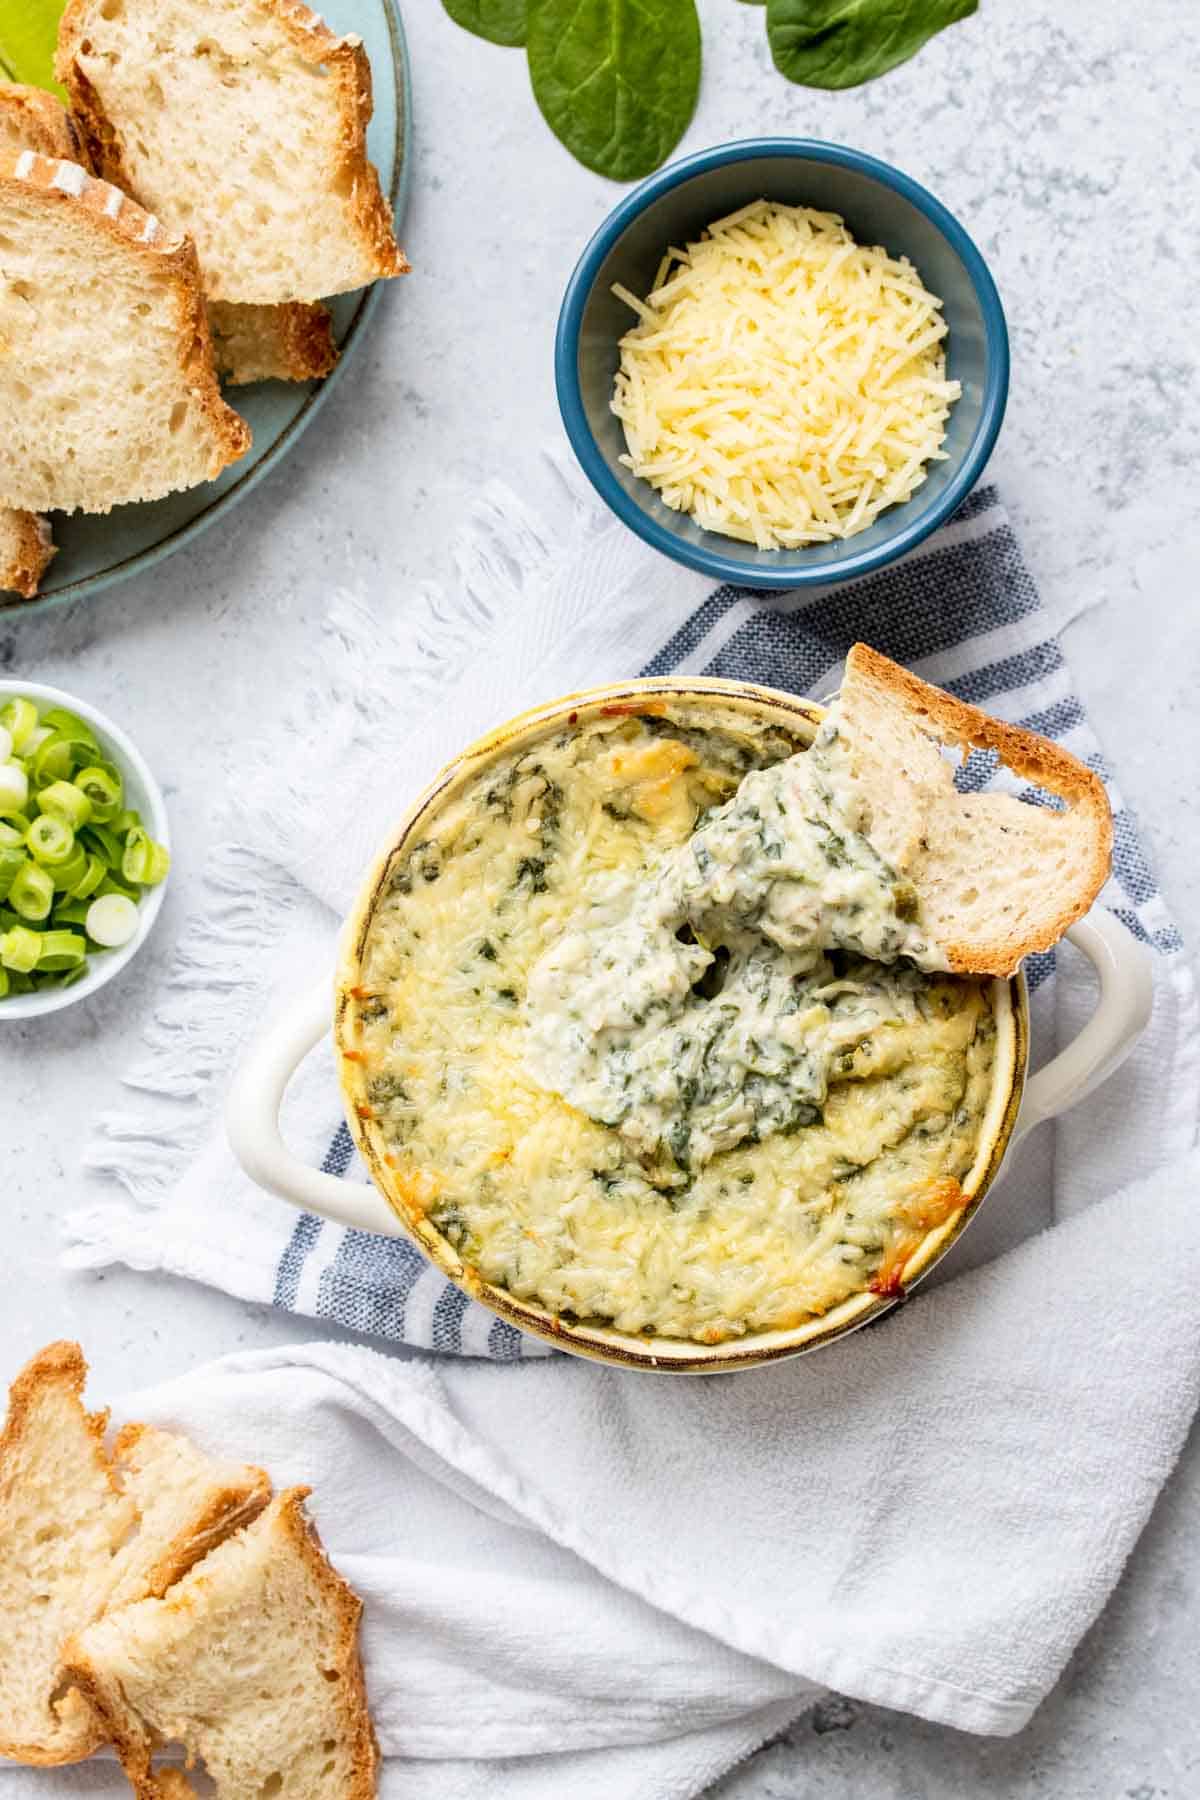 Top view of a bowl of baked spinach dip with a dipped piece of bread sitting on the edge next to a bowl of Parmesan